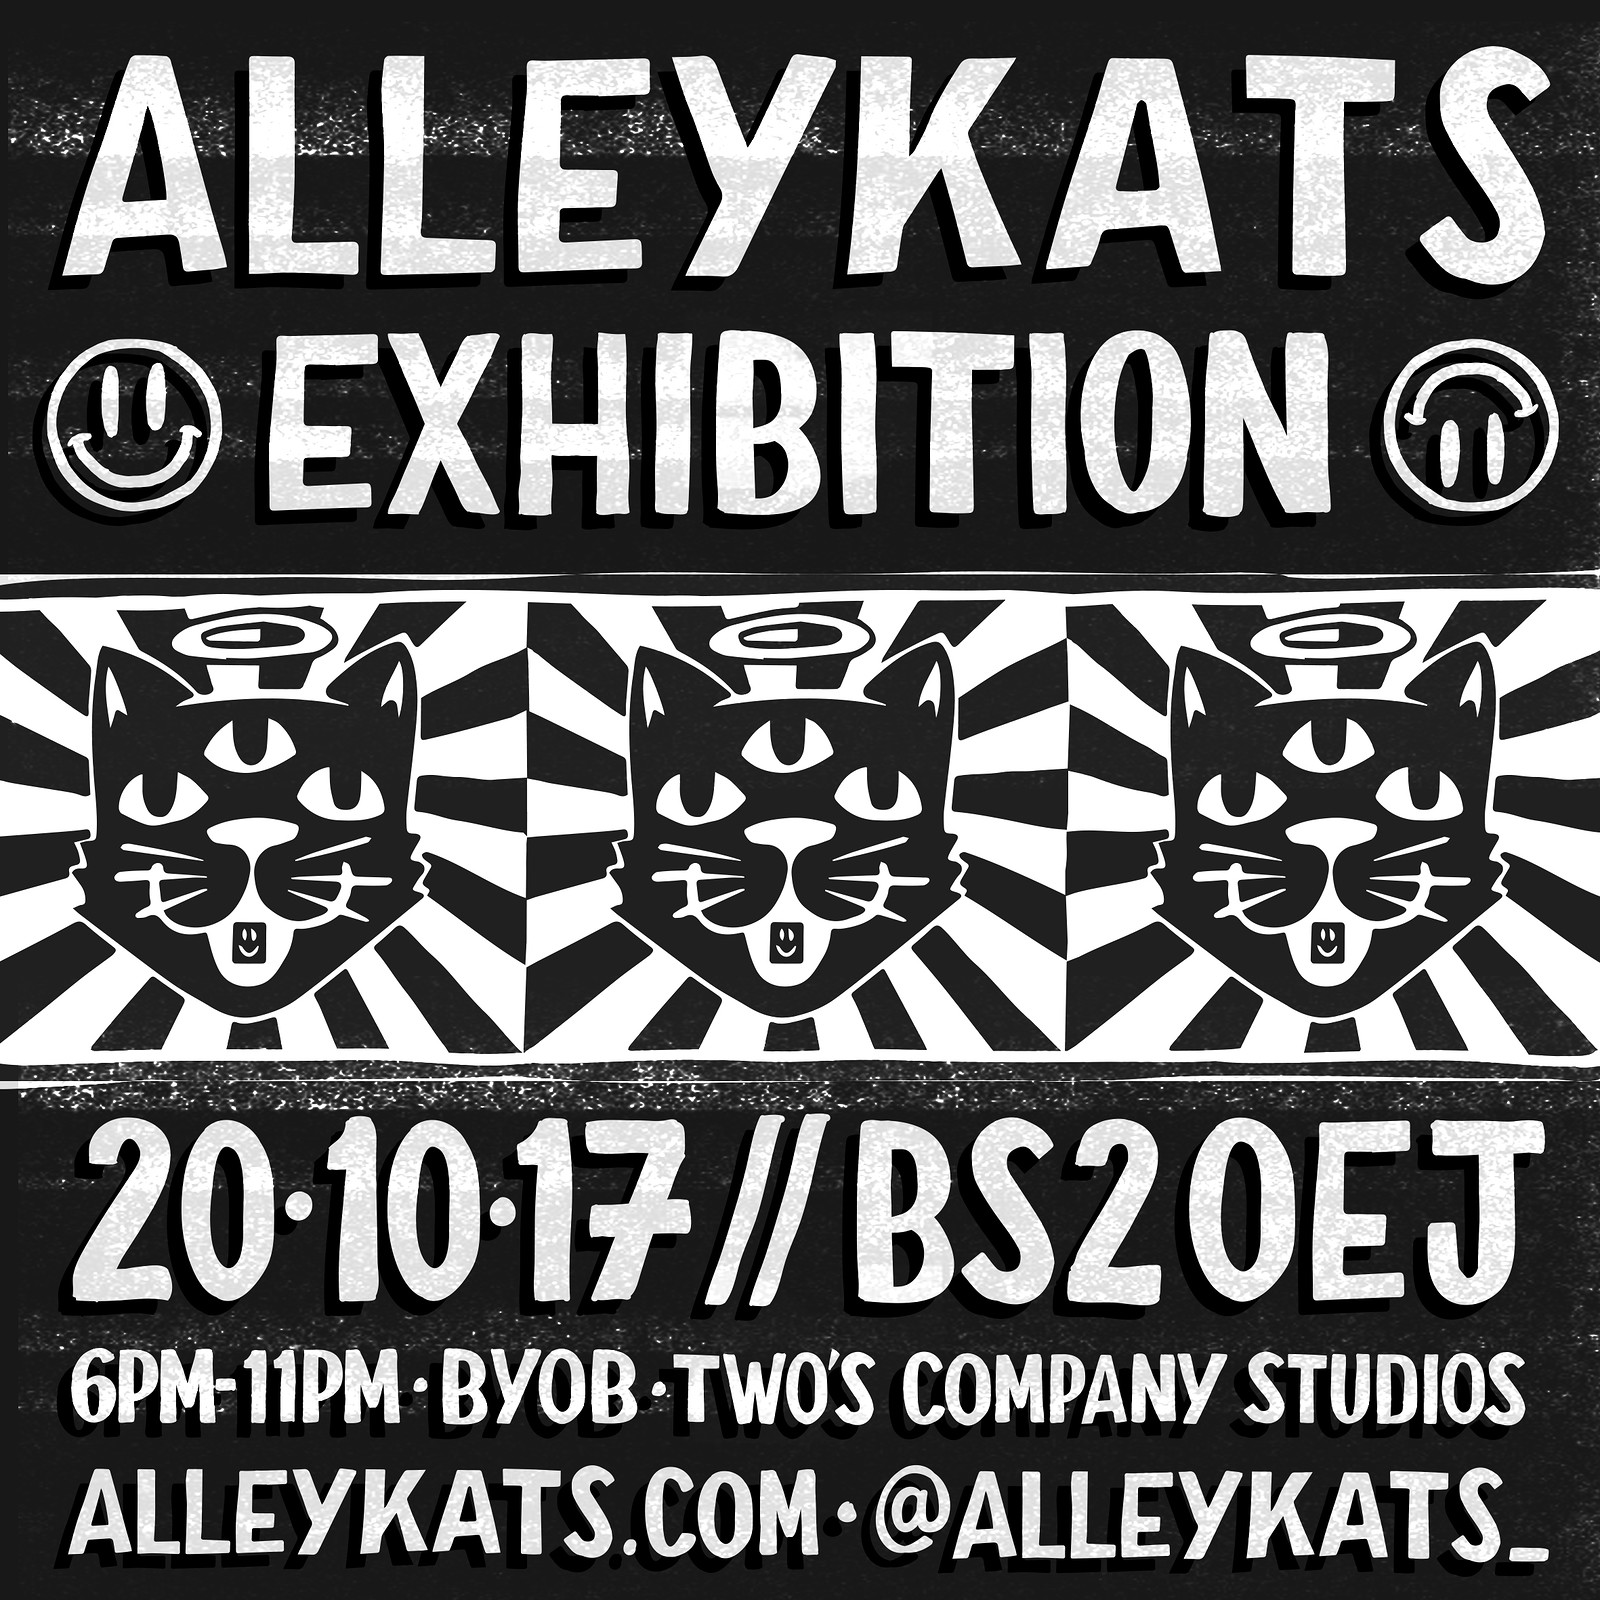 Alleykats Exhibition Launch Party at Two's Company Studios